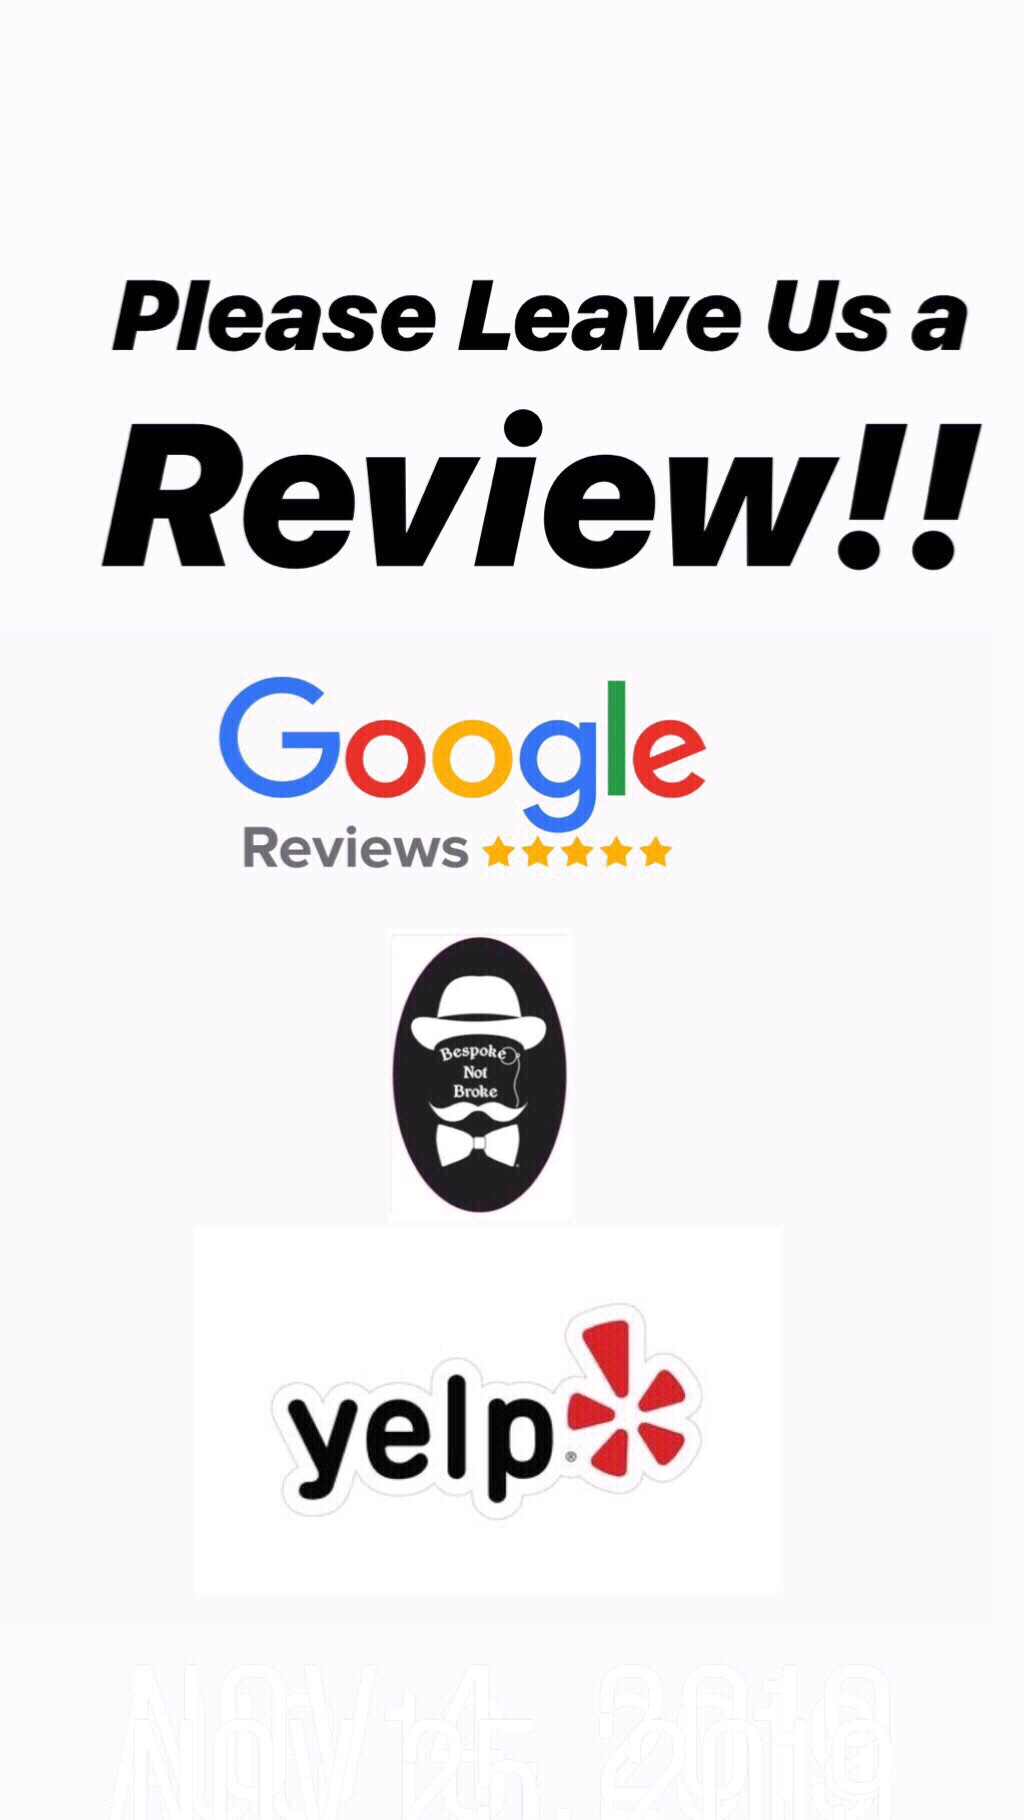 Google and Yelp Reviews Requested